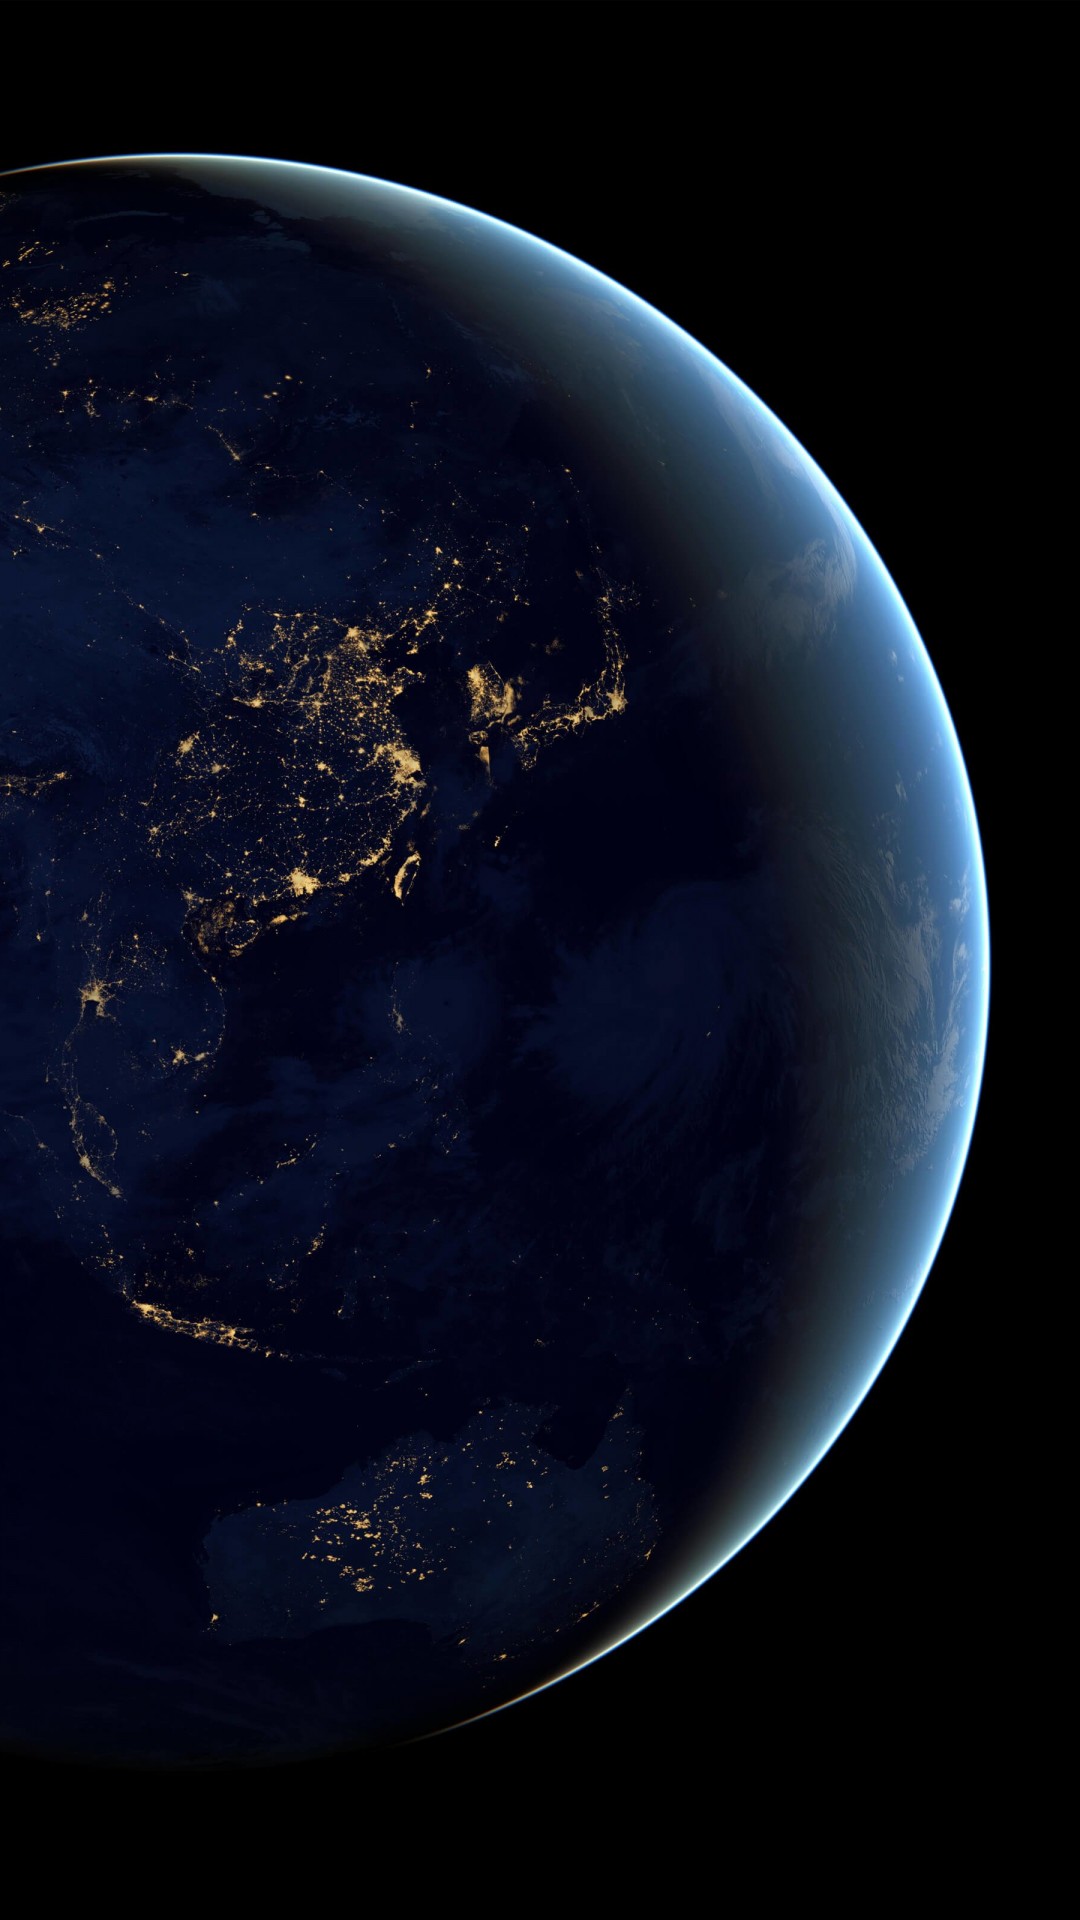 Earth At Night Seen From Space Wallpaper for Motorola Moto X